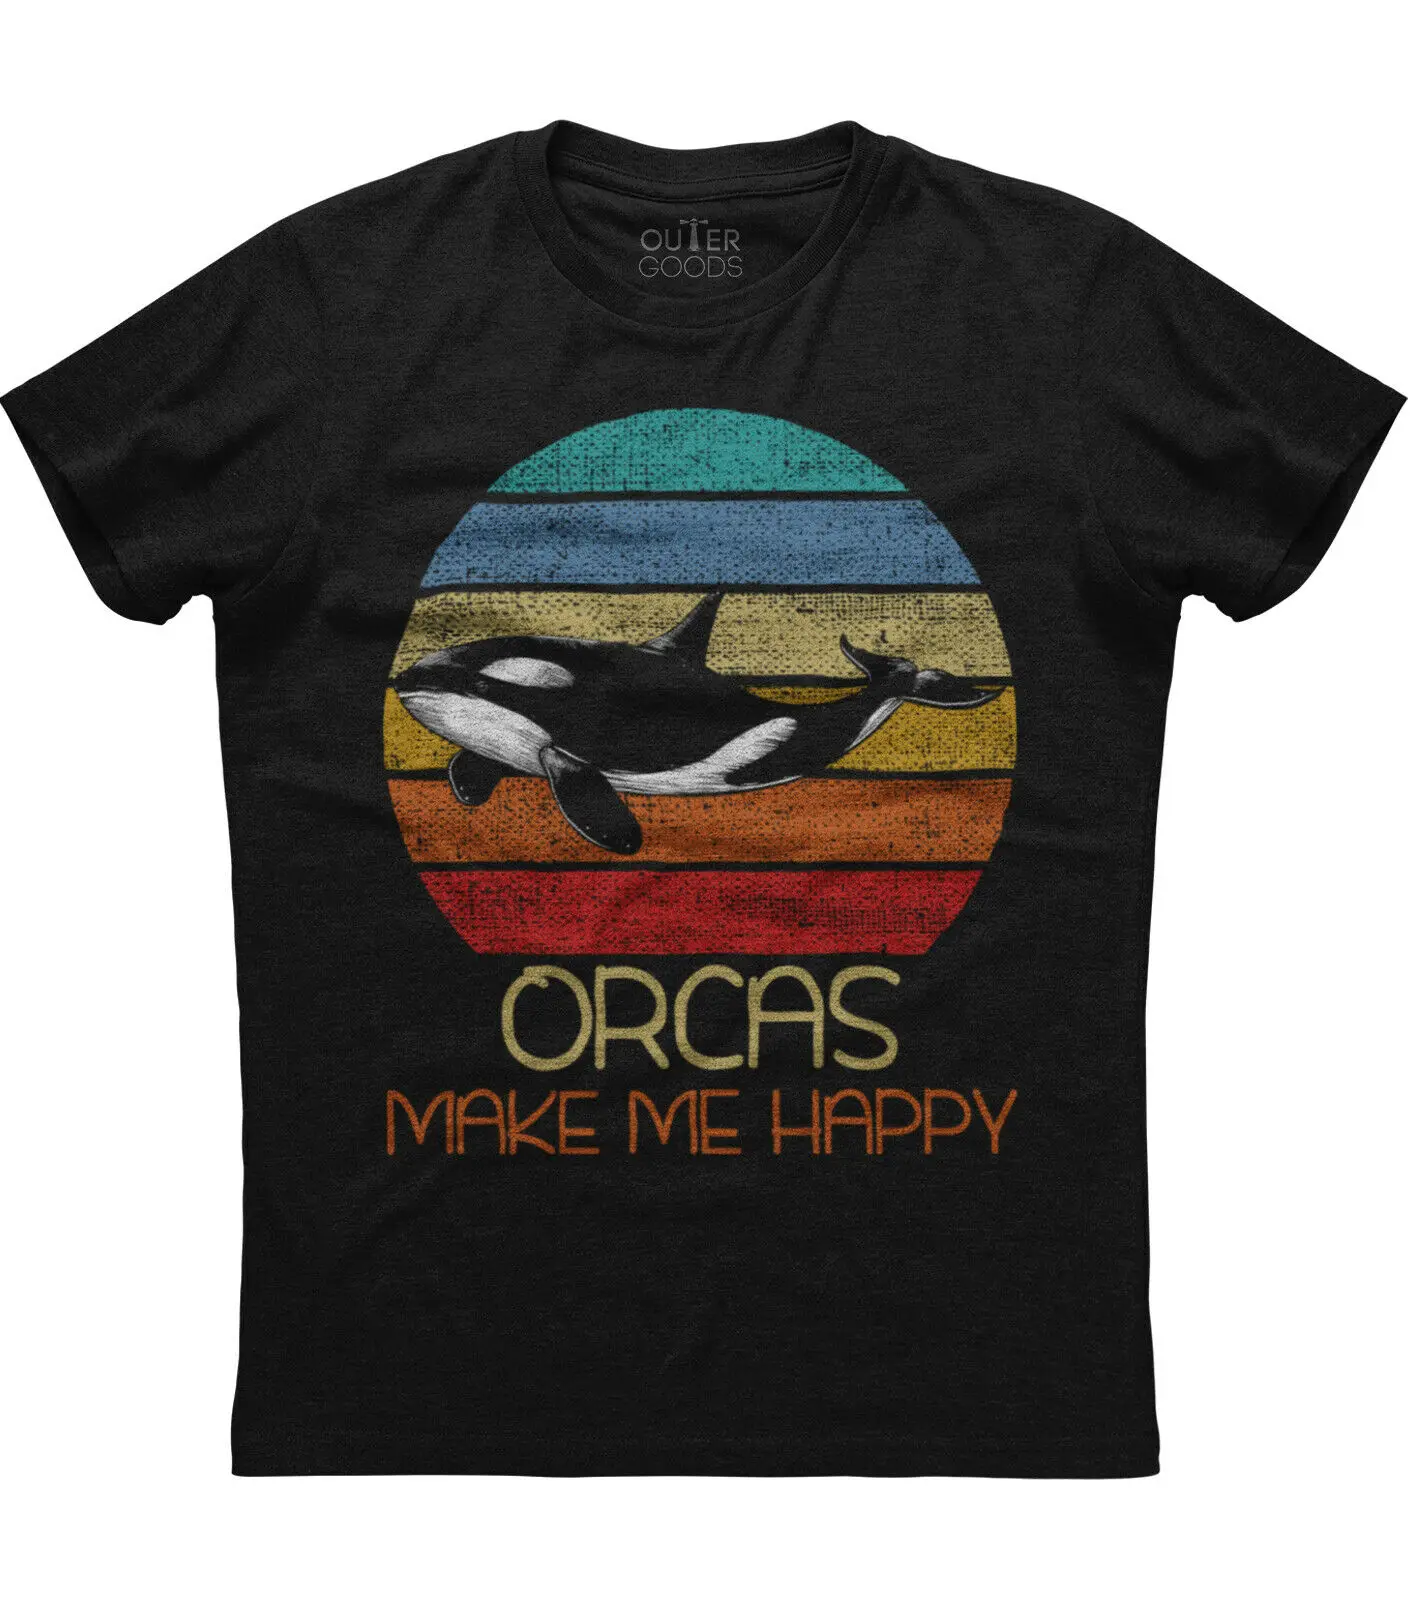 Orcas Make Me Happy. Vintage Sunset Killer Whale Printed T-Shirt. Summer Cotton O-Neck Short Sleeve Mens T Shirt New S-3XL